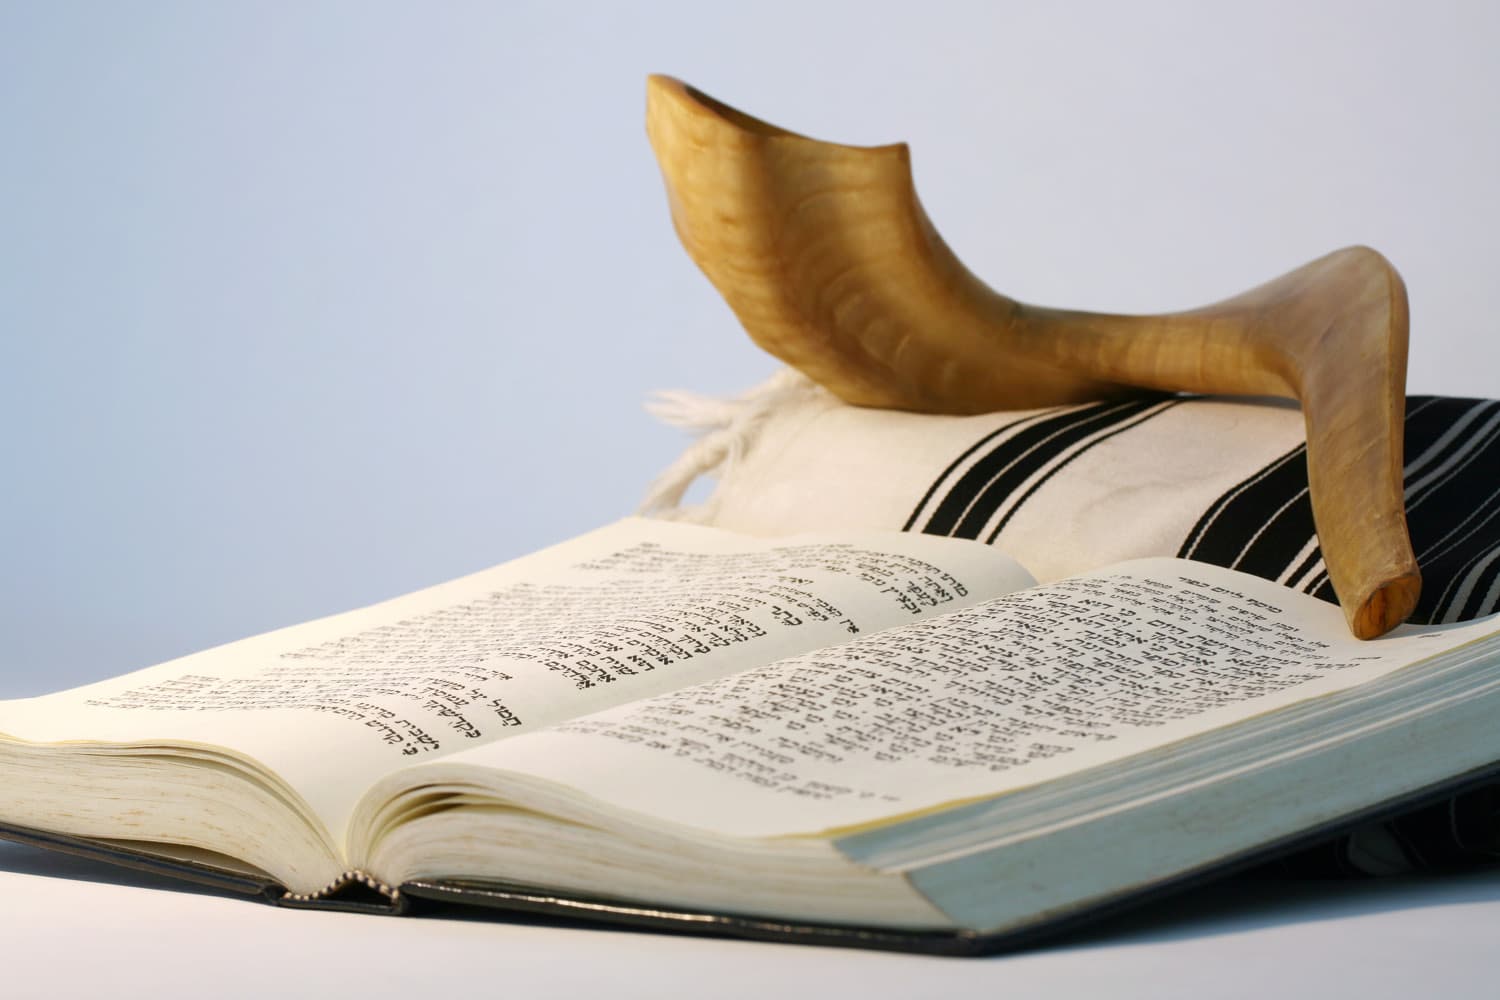 Religious Judaic objects used for prayer - a shofar, tallis, and prayer book.